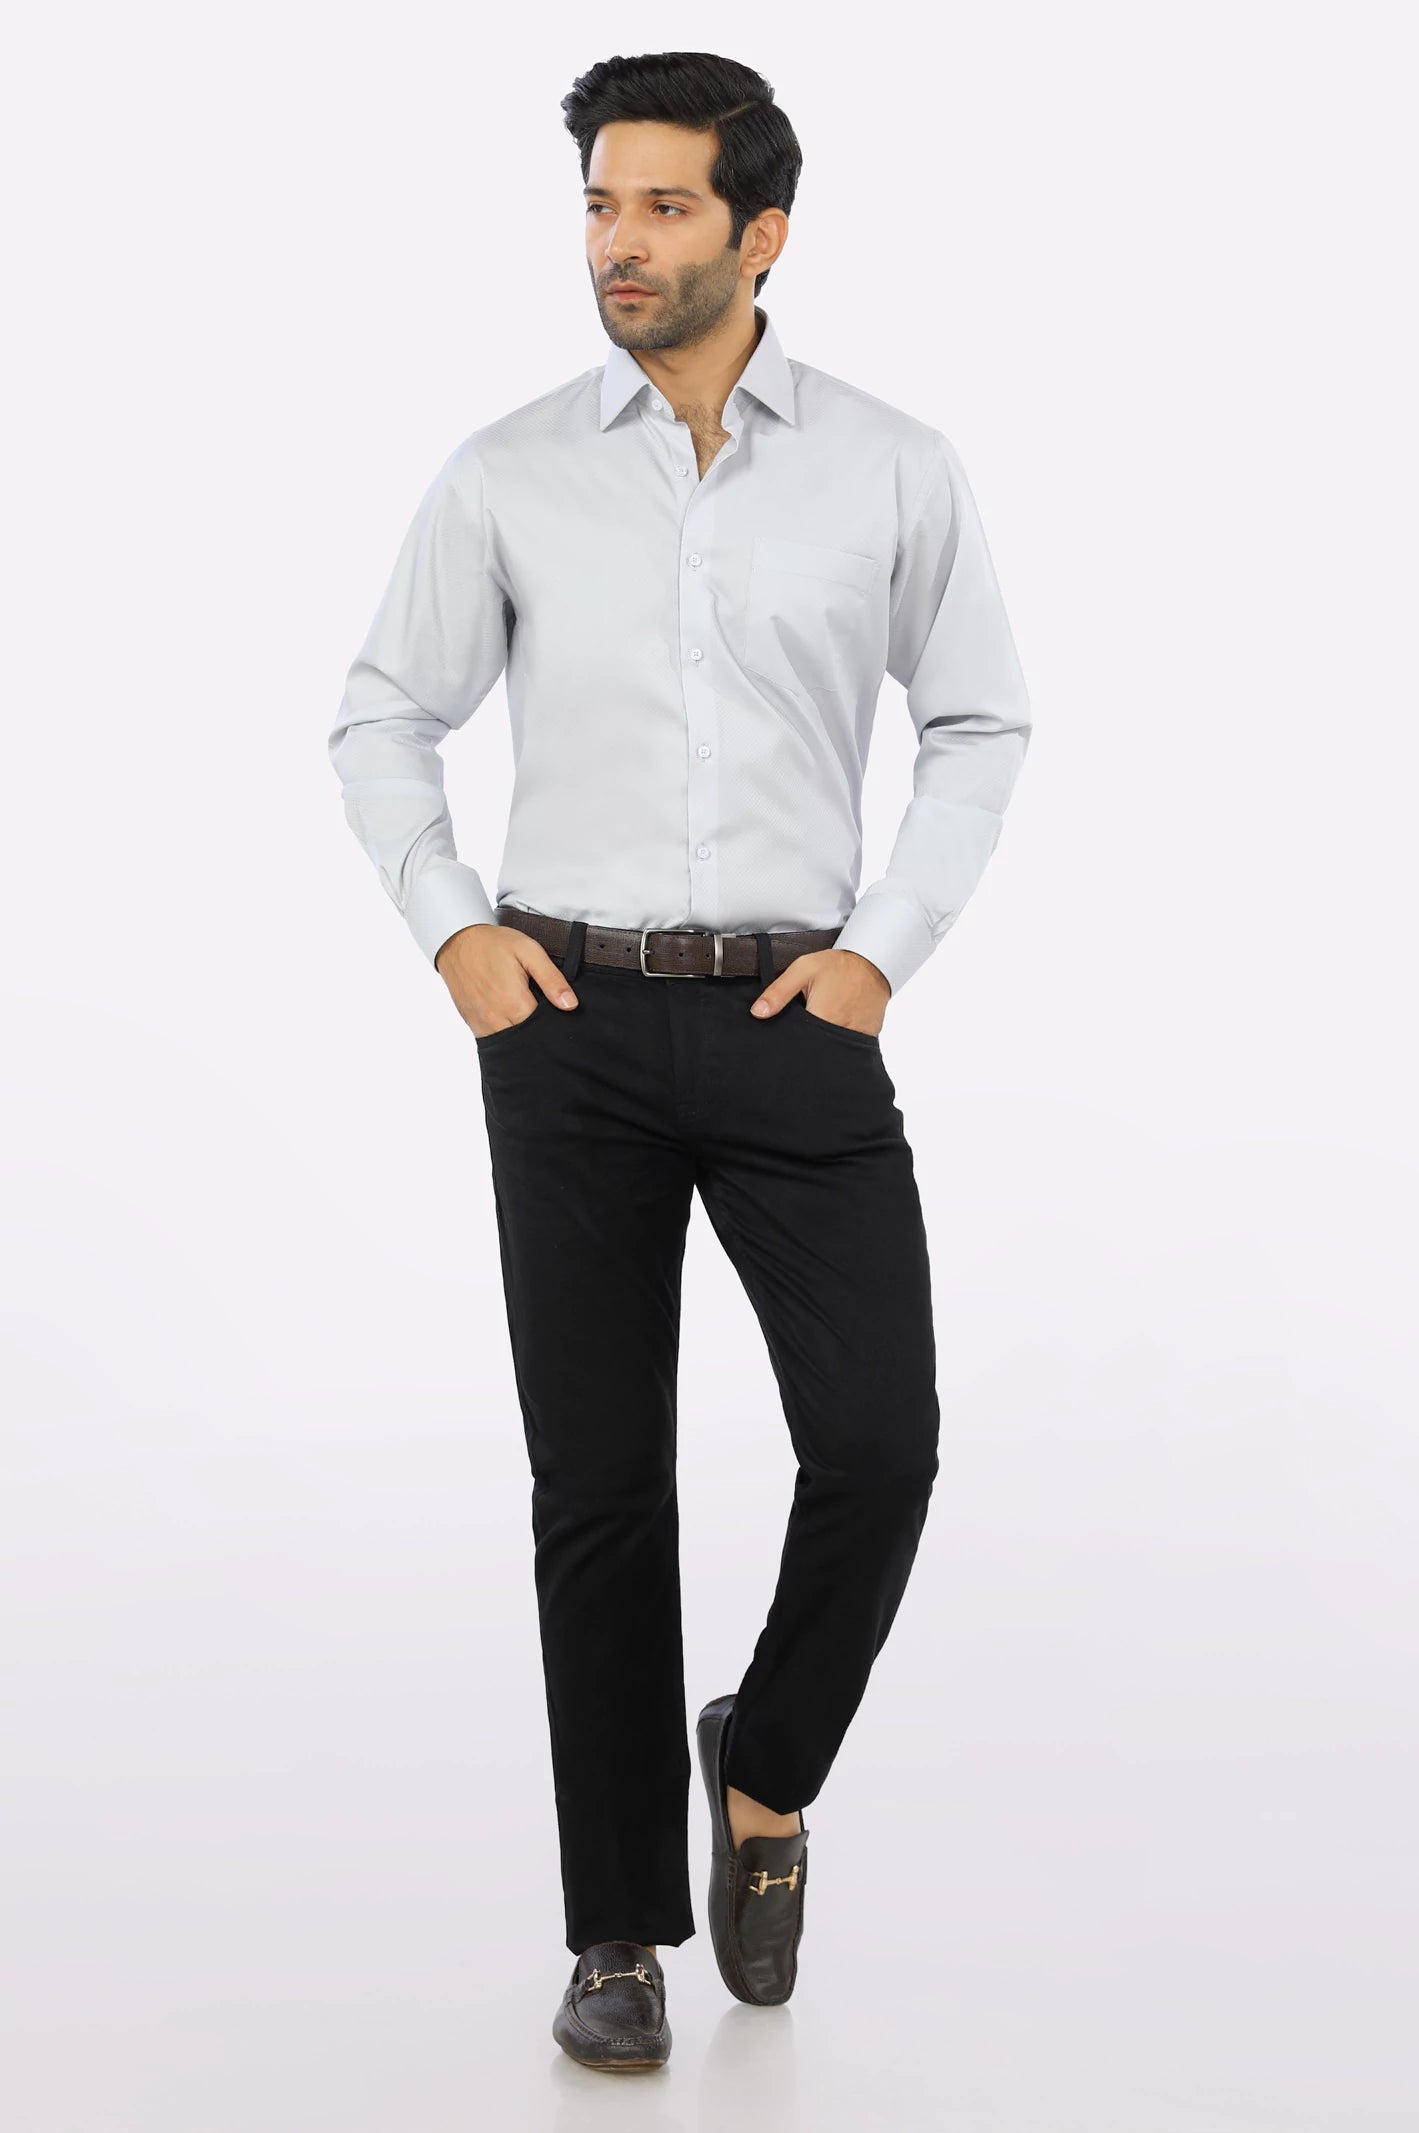 Grey Textured Formal Shirt From Diners